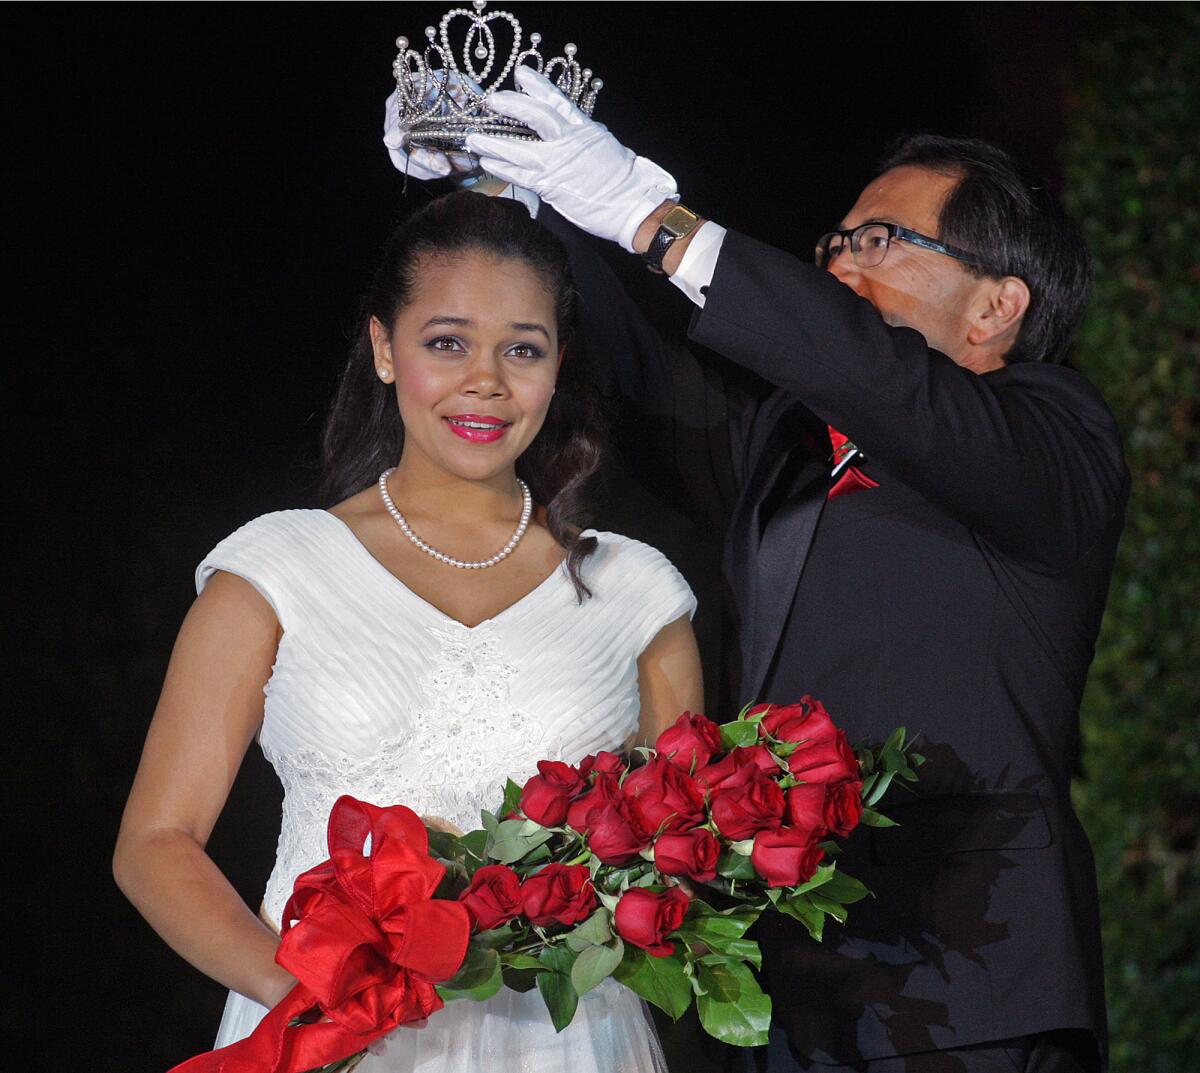 Rose Queen Madison Triplett is crowned by Tournament of Roses President Rich Chinen at the announcement and coronation ceremony for the 2015 Tournament of Roses on the front steps of the Pasadena Civic Auditorium on Tuesday, October 21, 2014.